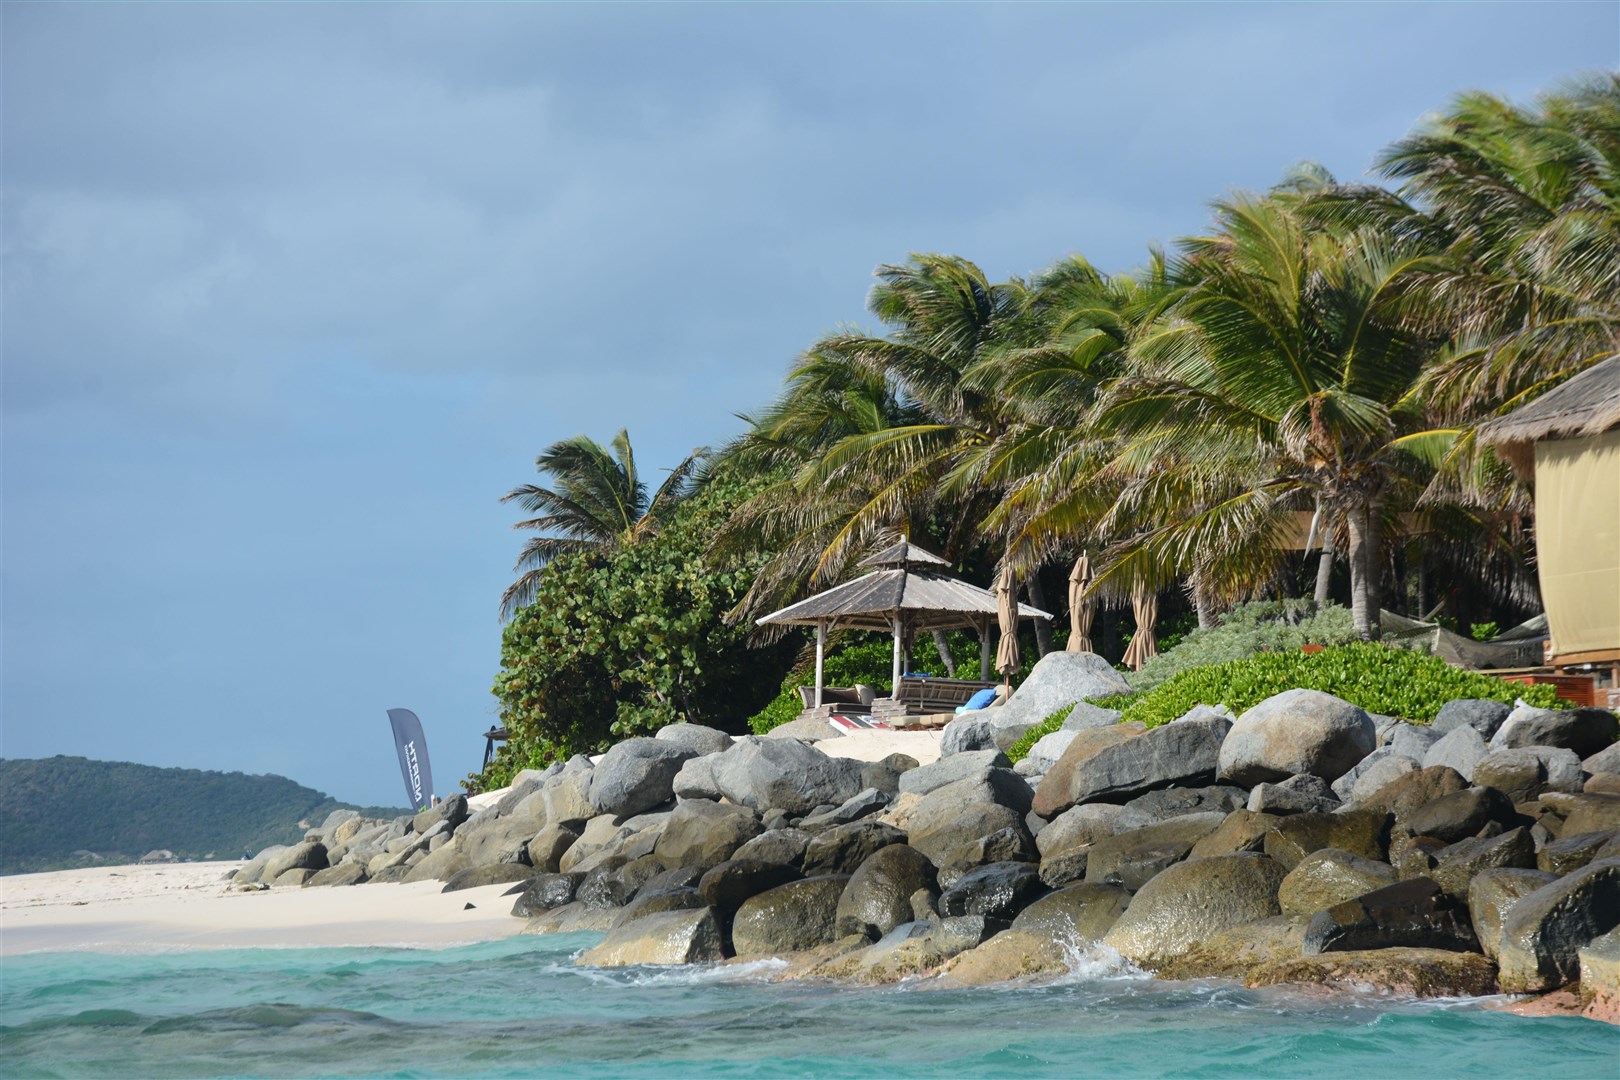 Jones stayed at Necker Island, a private Caribbean island owned by Richard Branson (Alamy/PA)